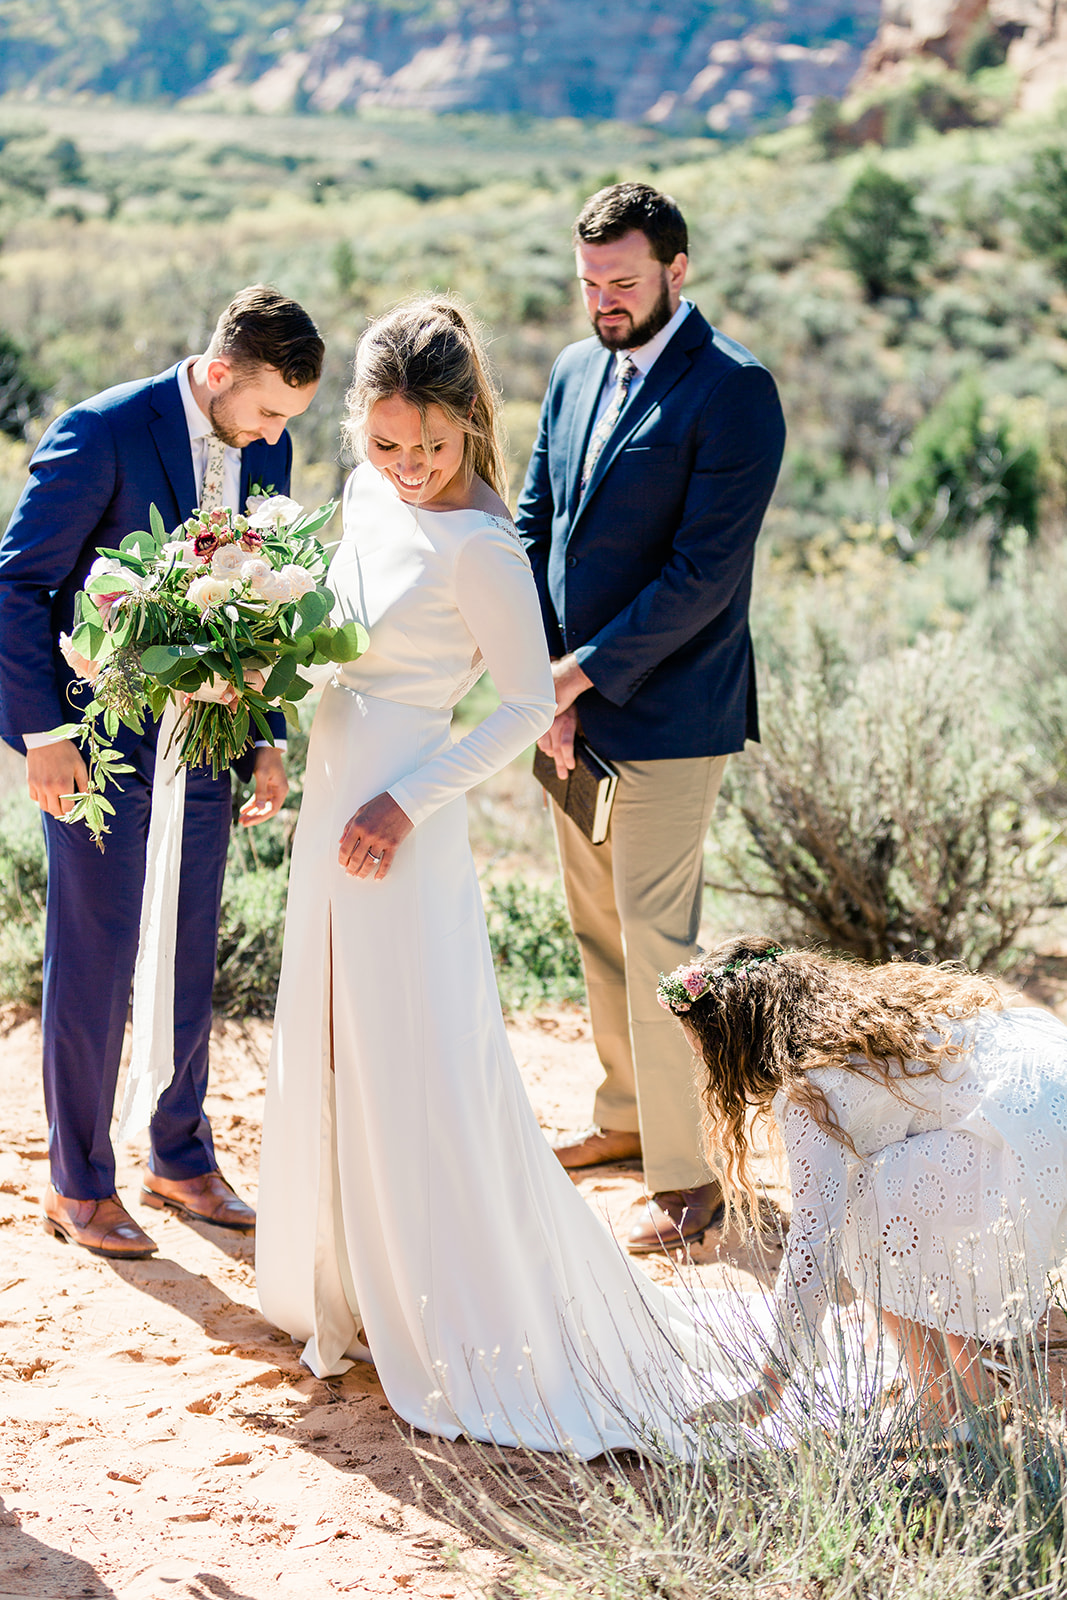 flower girl spreads out bride's dress for elopement ceremony